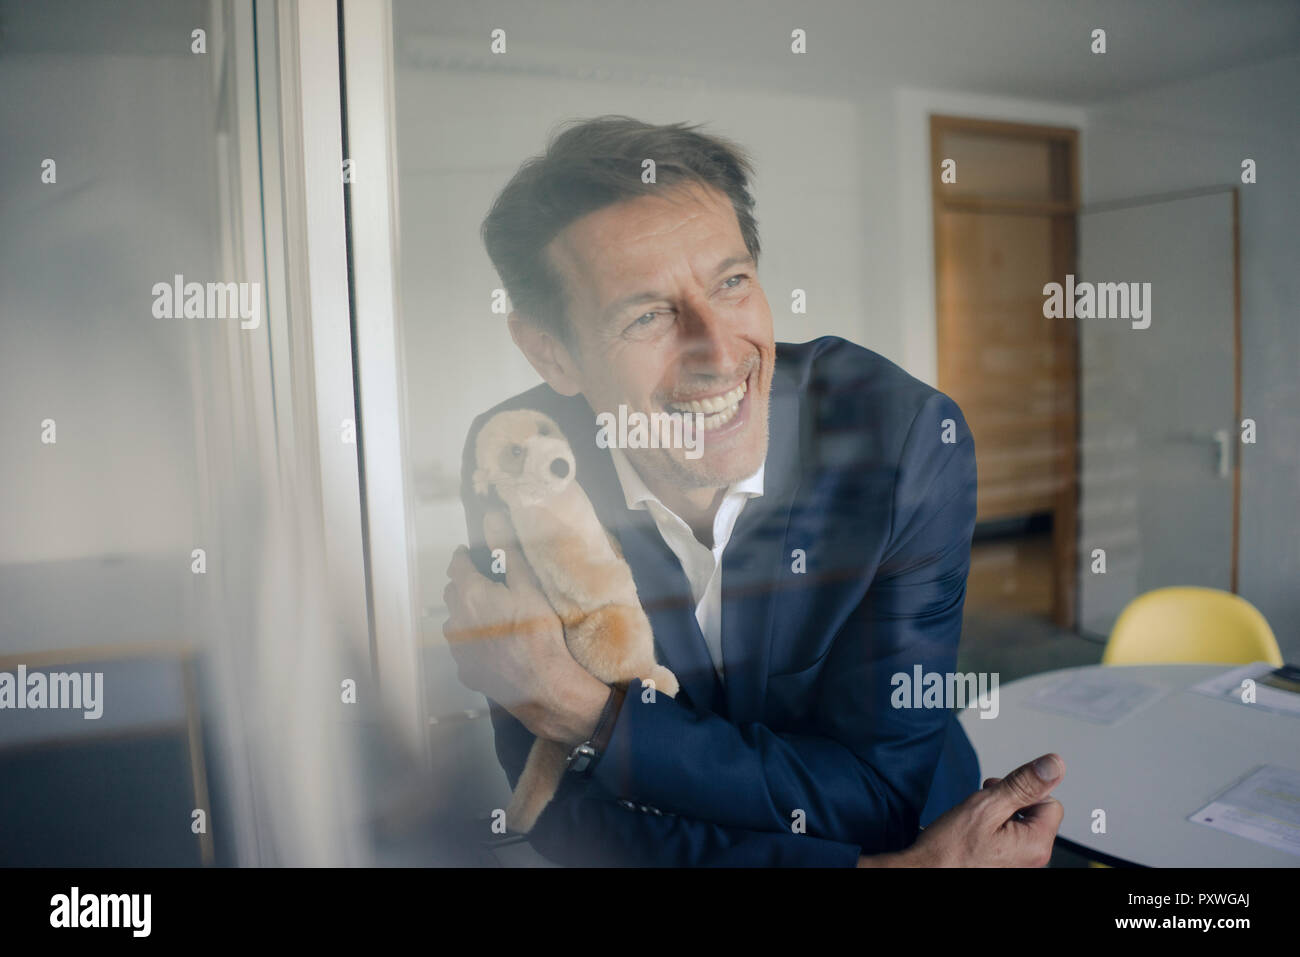 Successful businessman holding cuddly toy Stock Photo